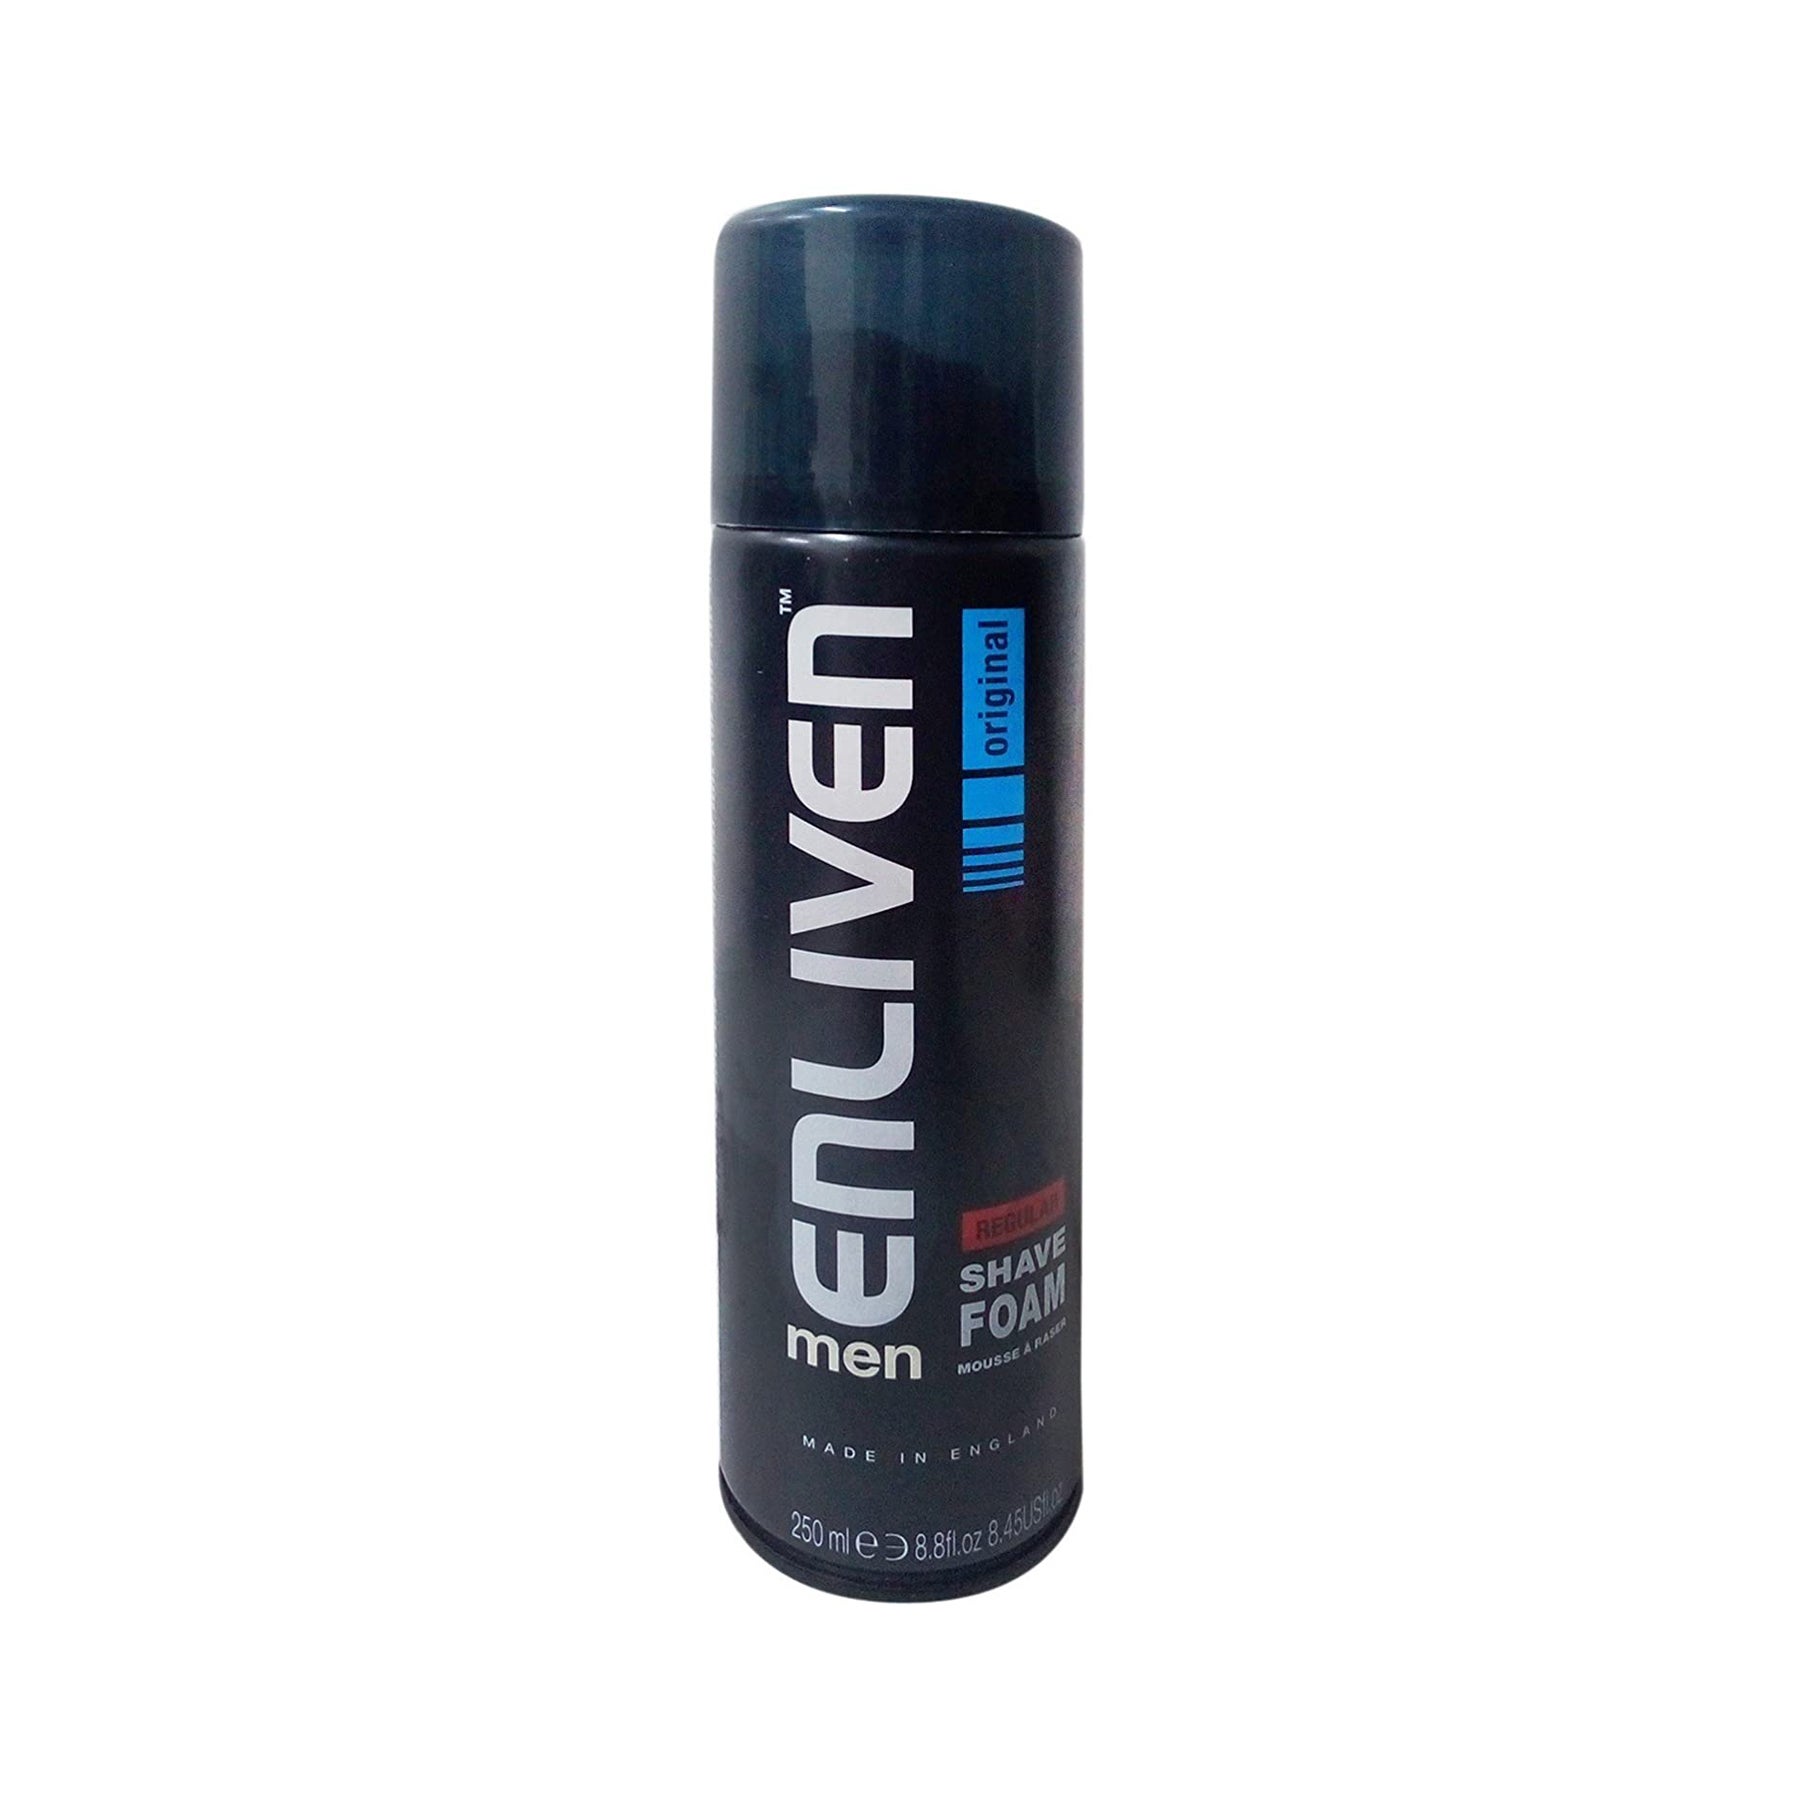 Enliven Mens Shave Foam 250ml | Hair Removal | Product